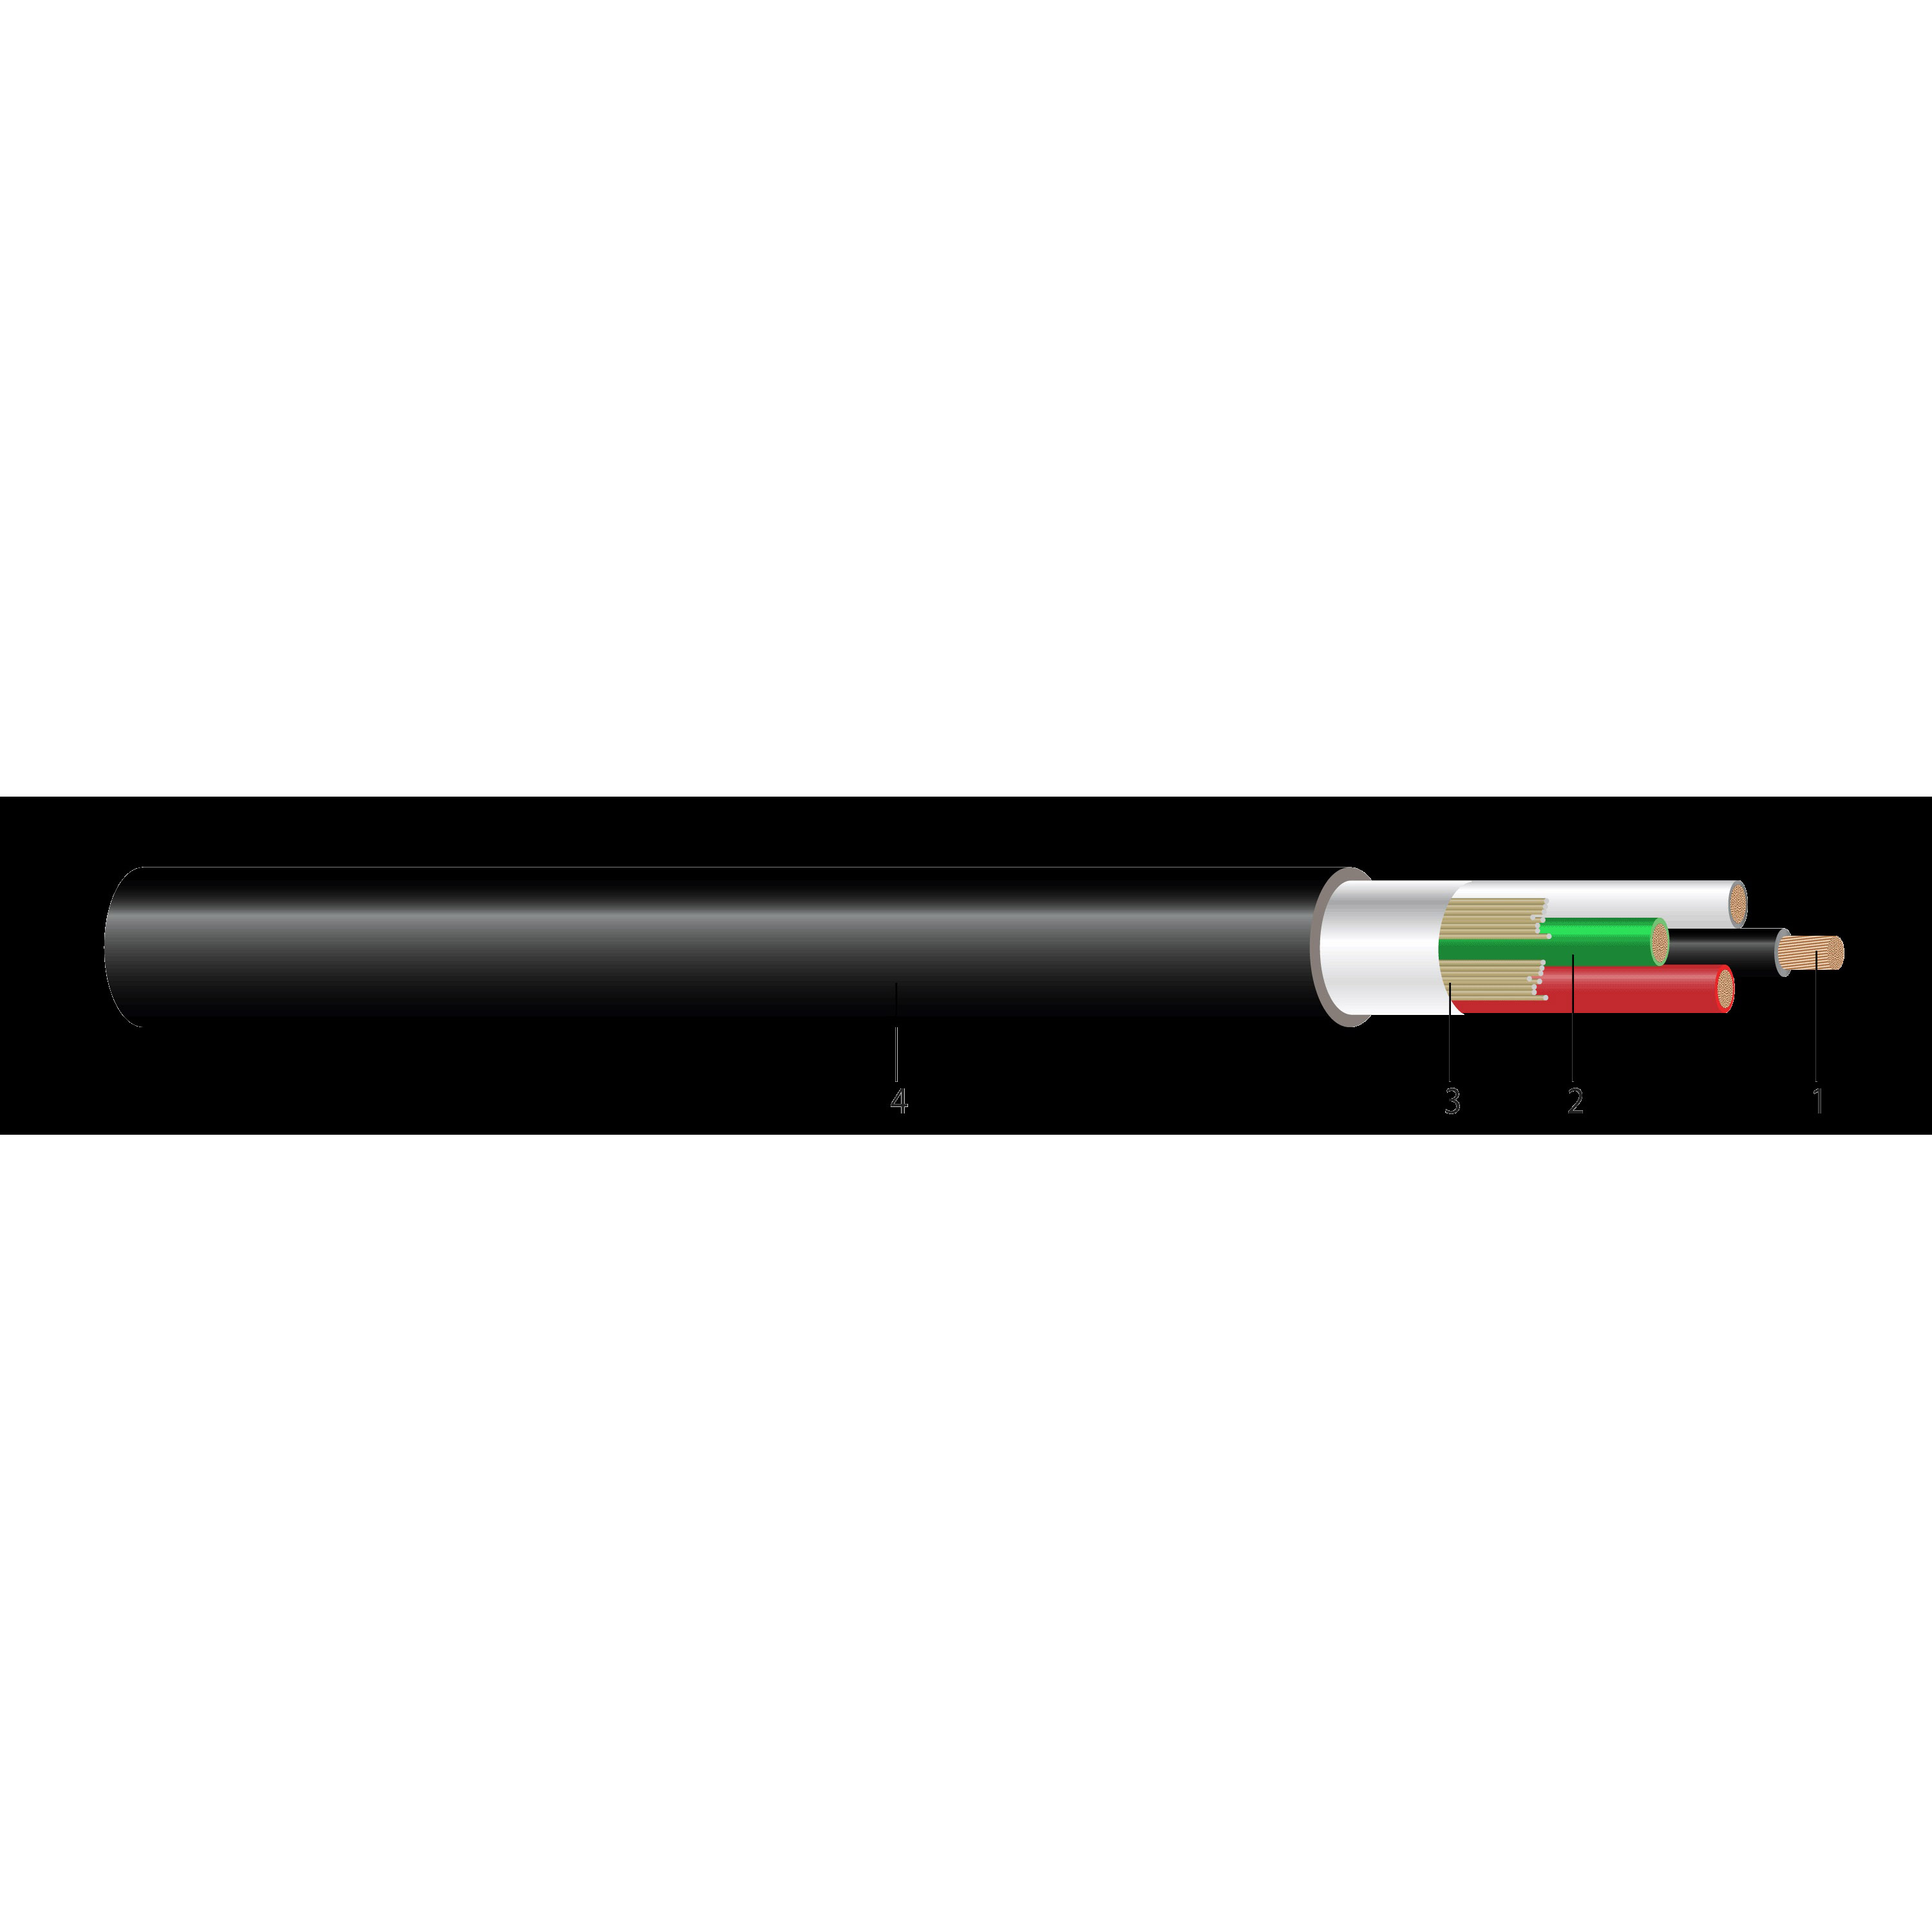 Southwire ROYAL 55808701 Flexible Cord, 12 AWG Wire, 3-Conductor, 250 ft L, Copper Conductor, EPDM Rubber Insulation - 1